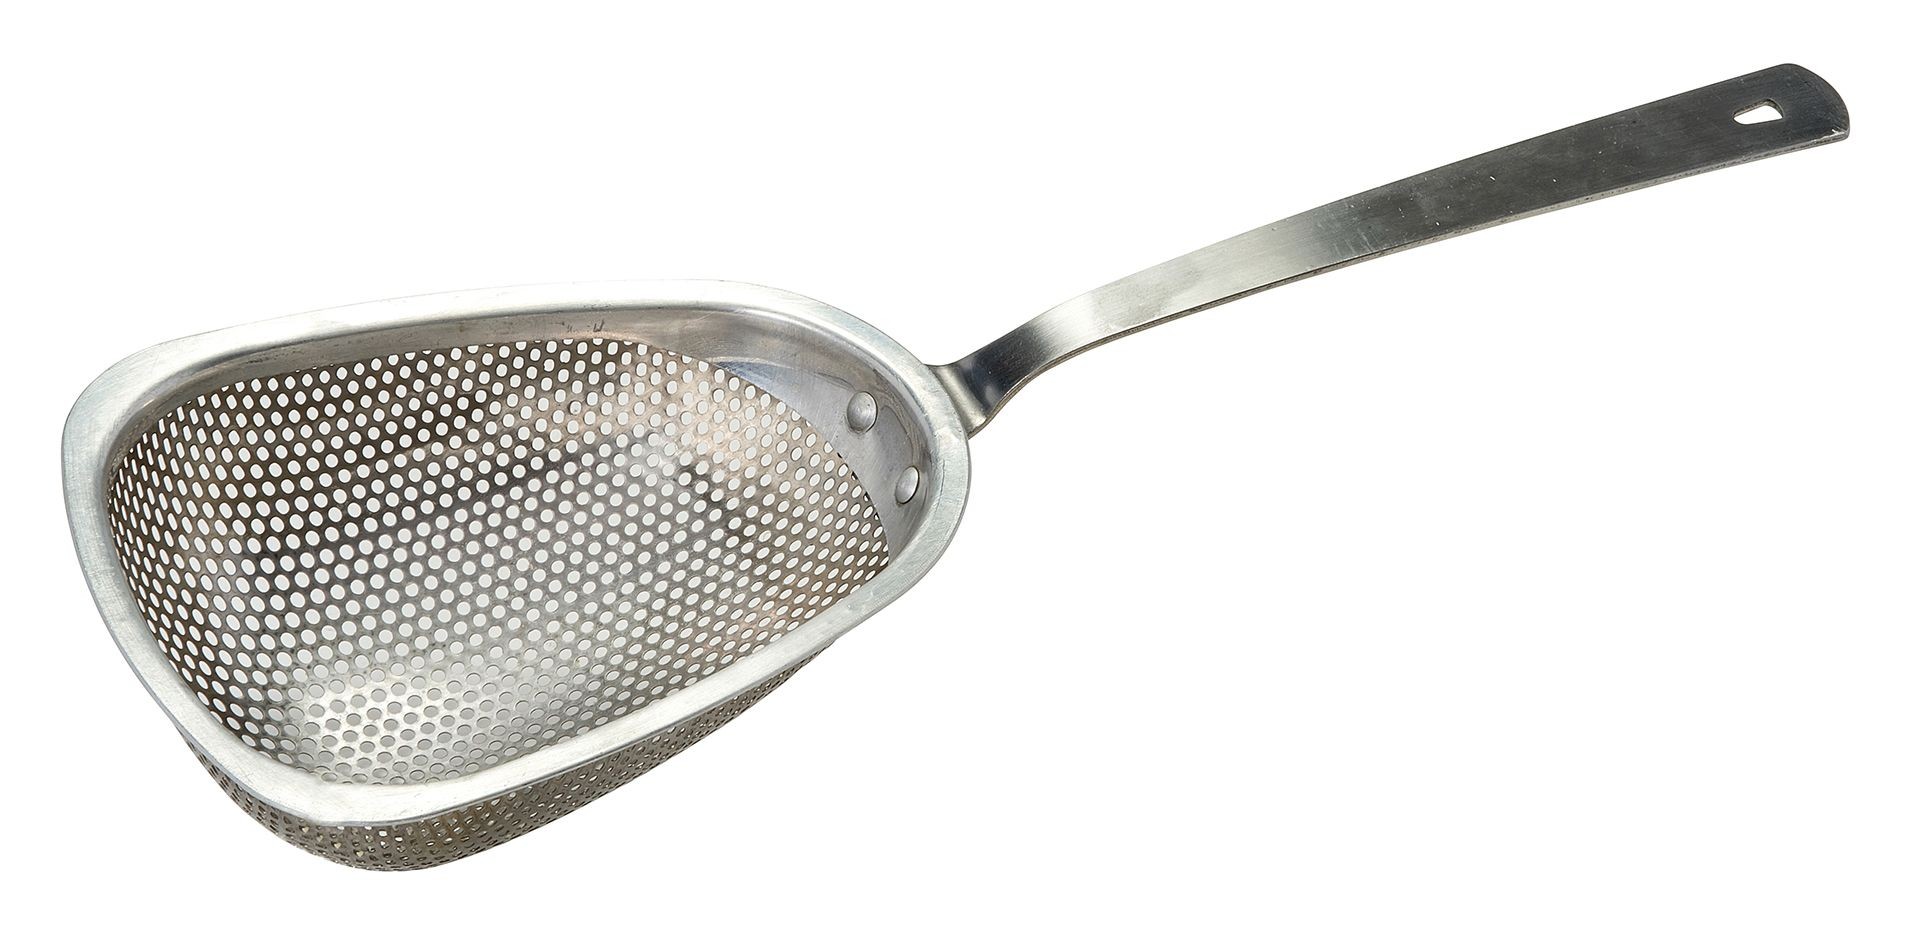 Winco CODS-7 Stainless Steel Large 18" Scoop Colander